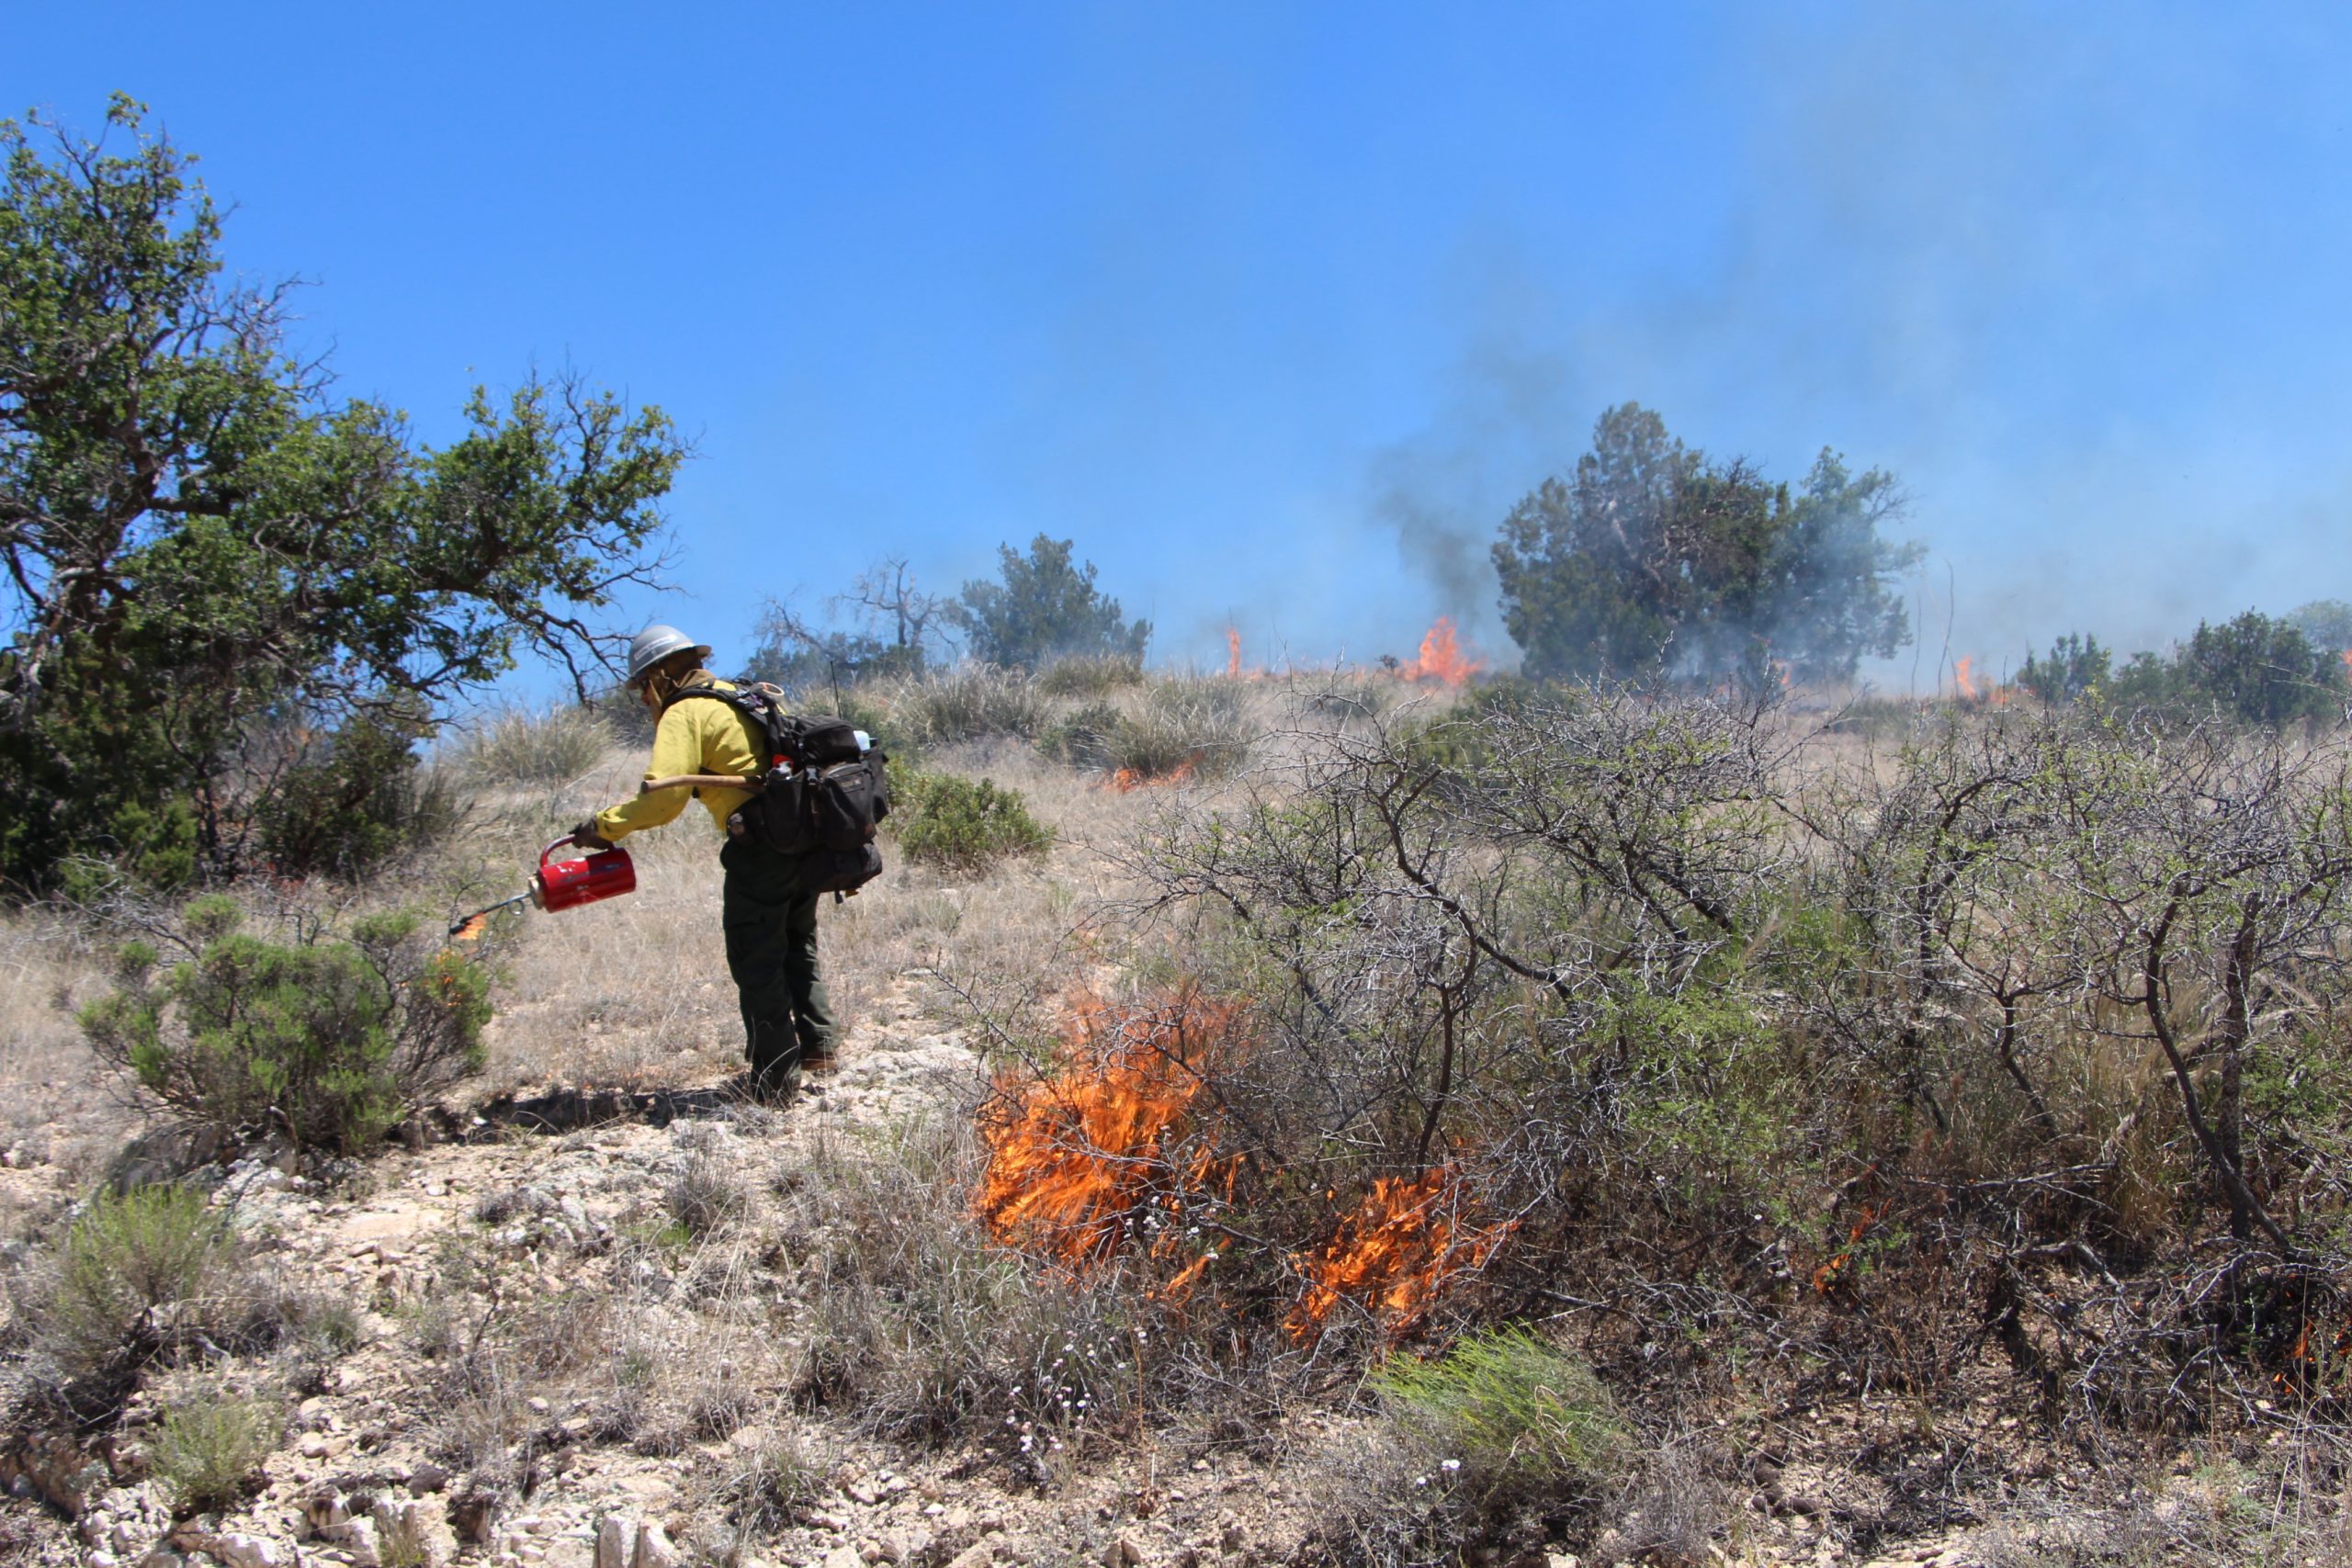 Wildland Fire Lessons Learned Center